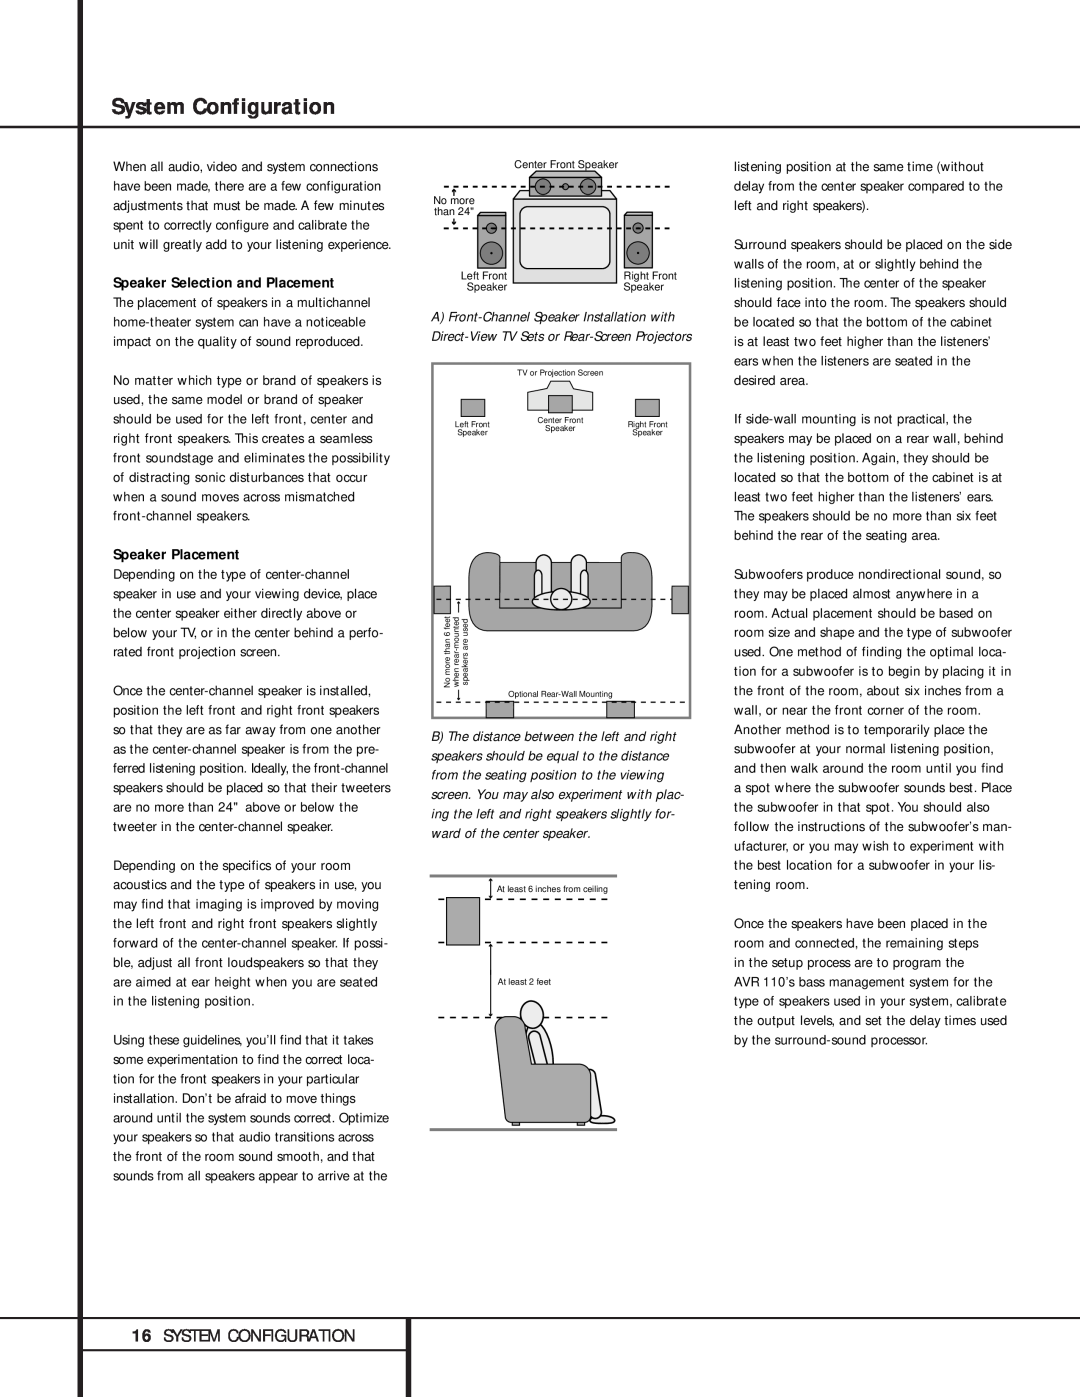 Harman-Kardon AVR 110 System Configuration, 16SYSTEM CONFIGURATION, Speaker Selection and Placement, Speaker Placement 